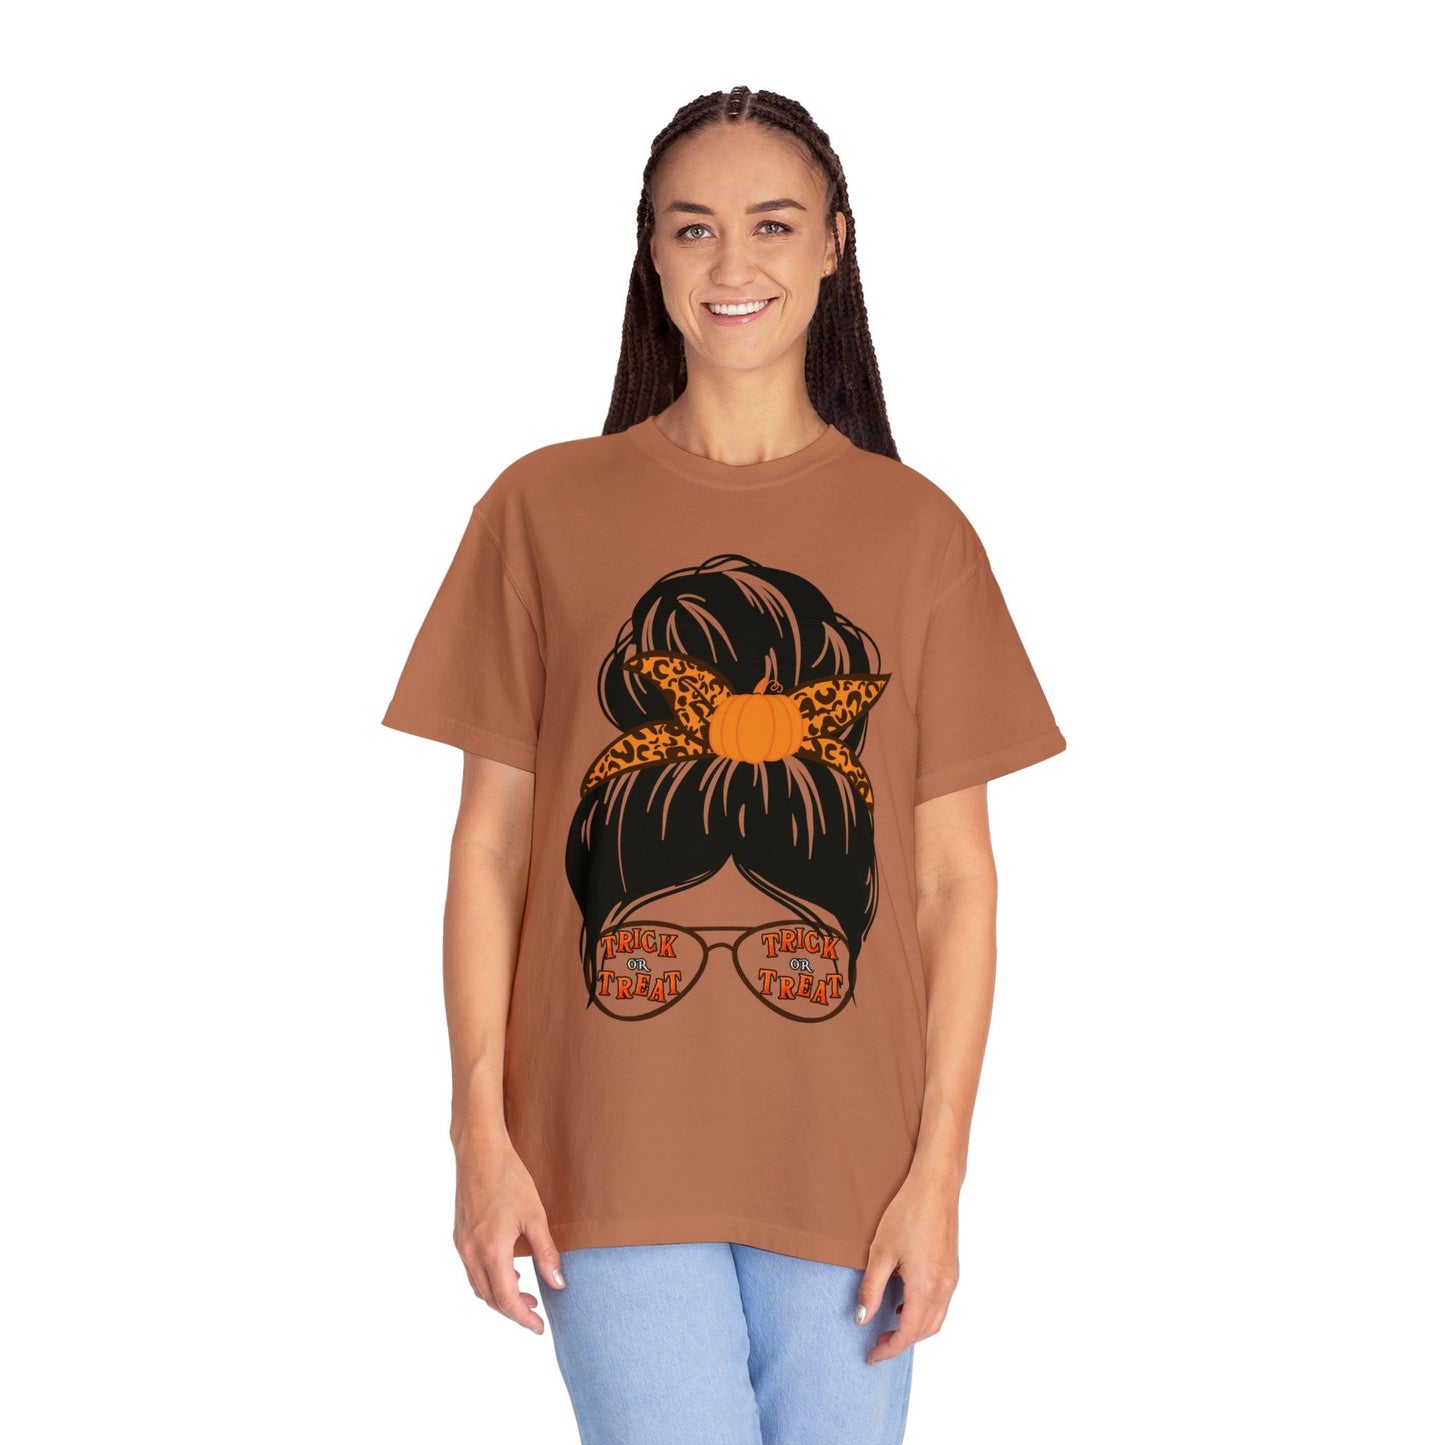 Mom Halloween Party Outfit Trick or Treat Shirt Vintage Shirt Halloween Costume Cute Spooky Shirt, Halloween Gift Halloween T-shirt Trick or Treat Outfit - Giftsmojo